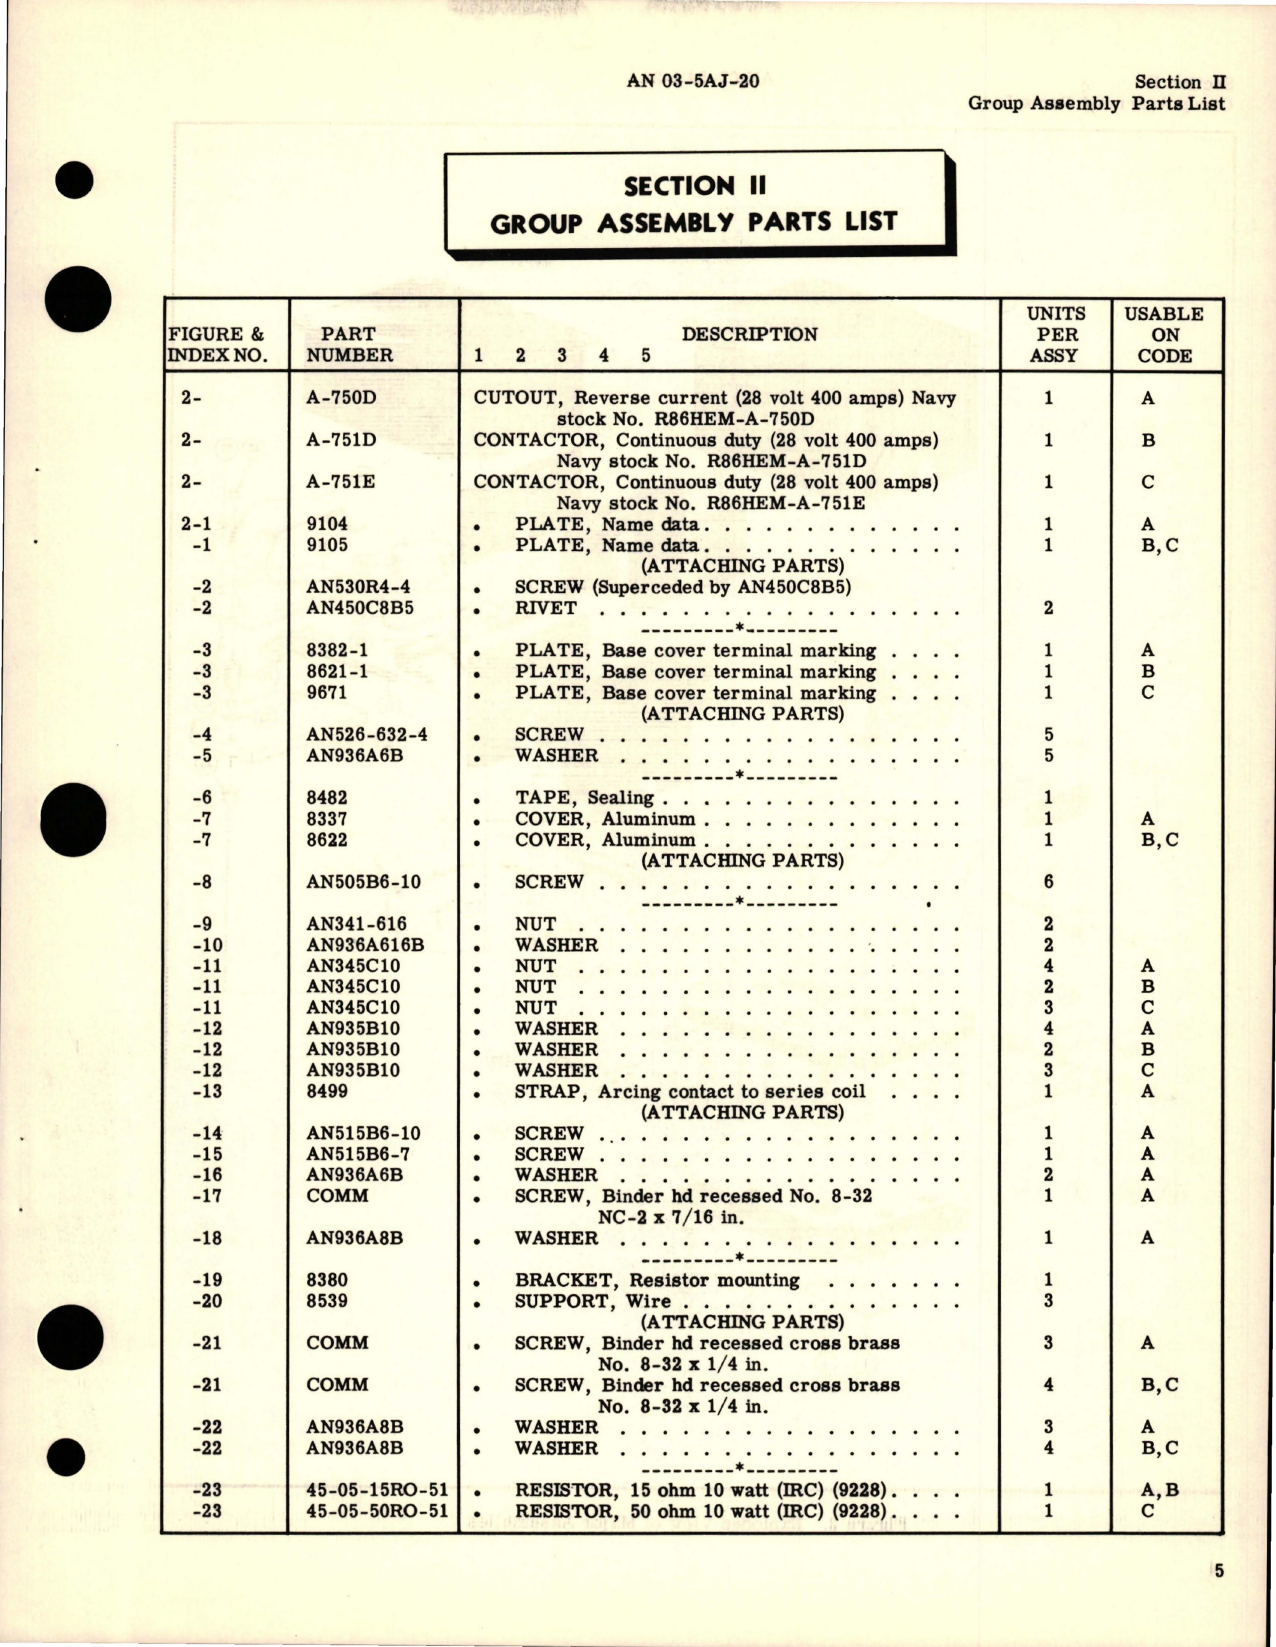 Sample page 7 from AirCorps Library document: Illustrated Parts Breakdown for Reverse Current Cutout - Model A-750D and Contactors - Models A-751D and A-751E